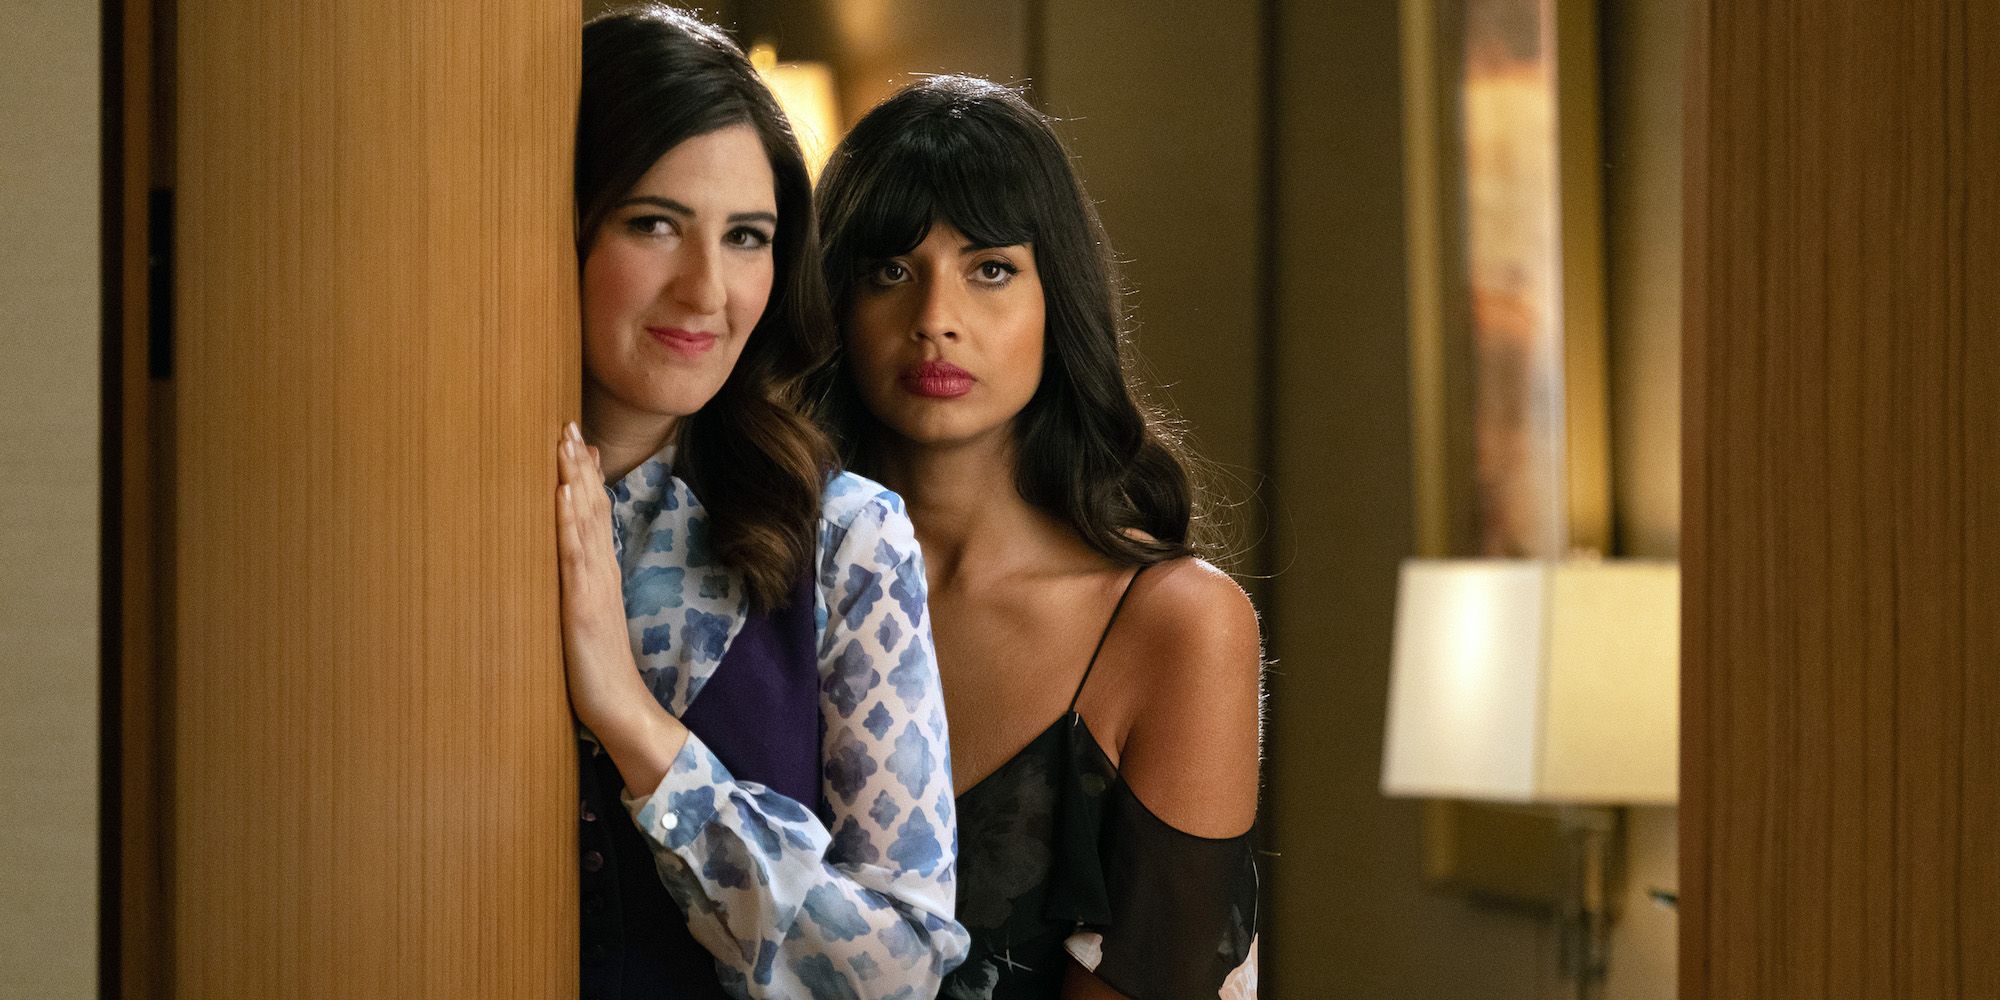 Jameela Jamil as Tahani and D'Arcy Carden as Janet in The Good Place